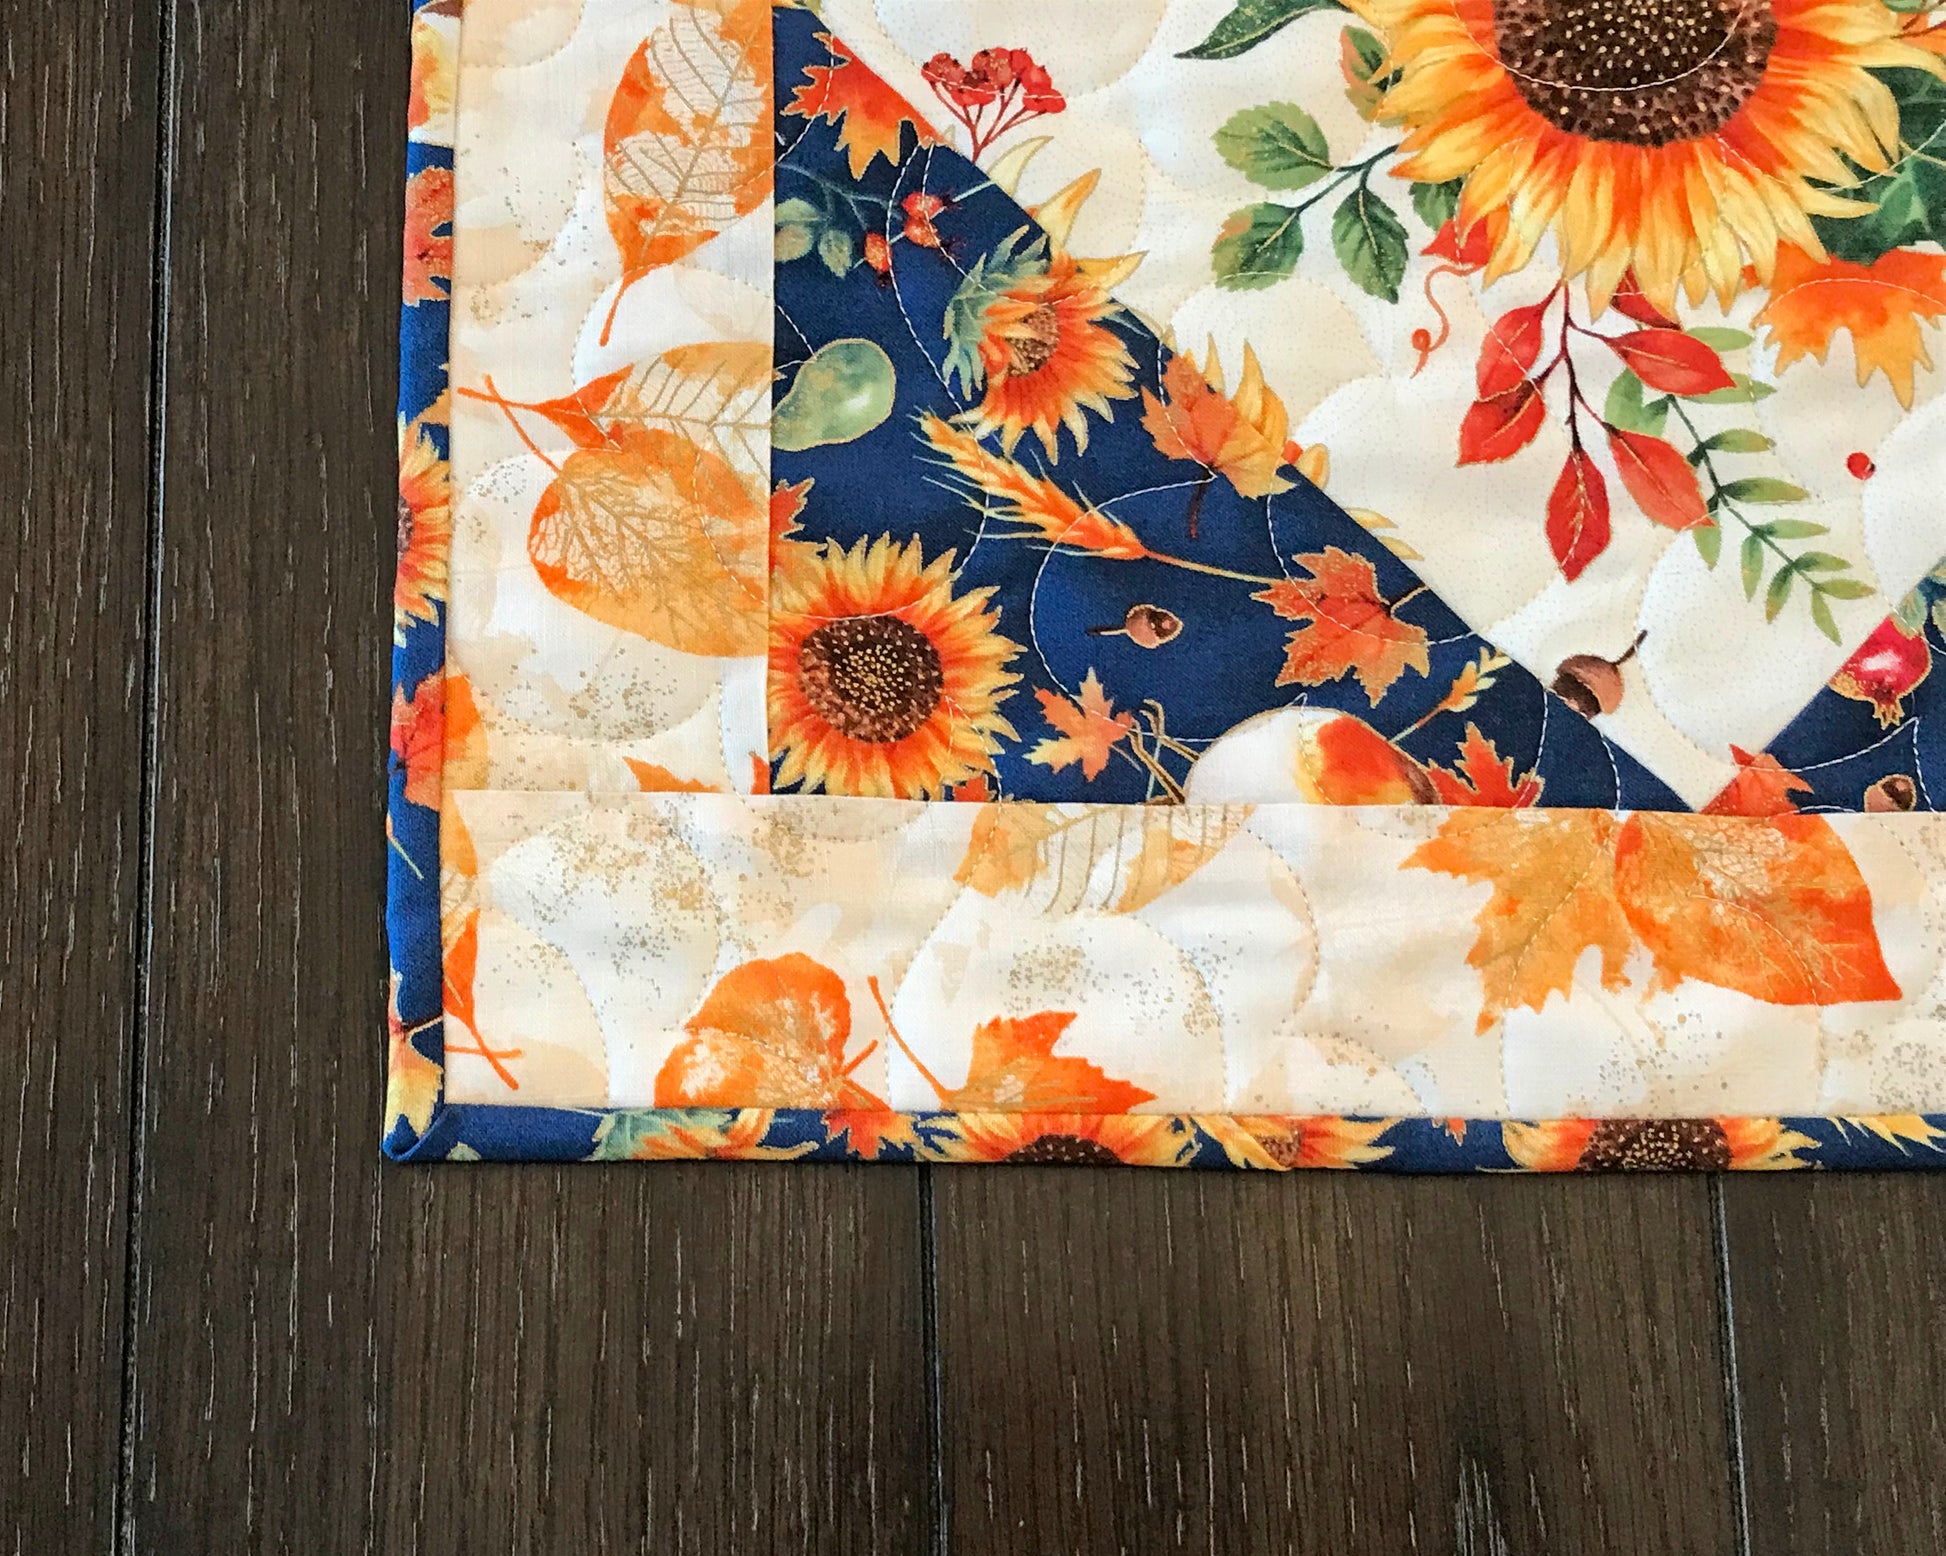 corner close up of Sunflower themed fall table runner with a center diamond pattern of sunflowers surrounded by gold leaves and dark blue accents displayed on a table